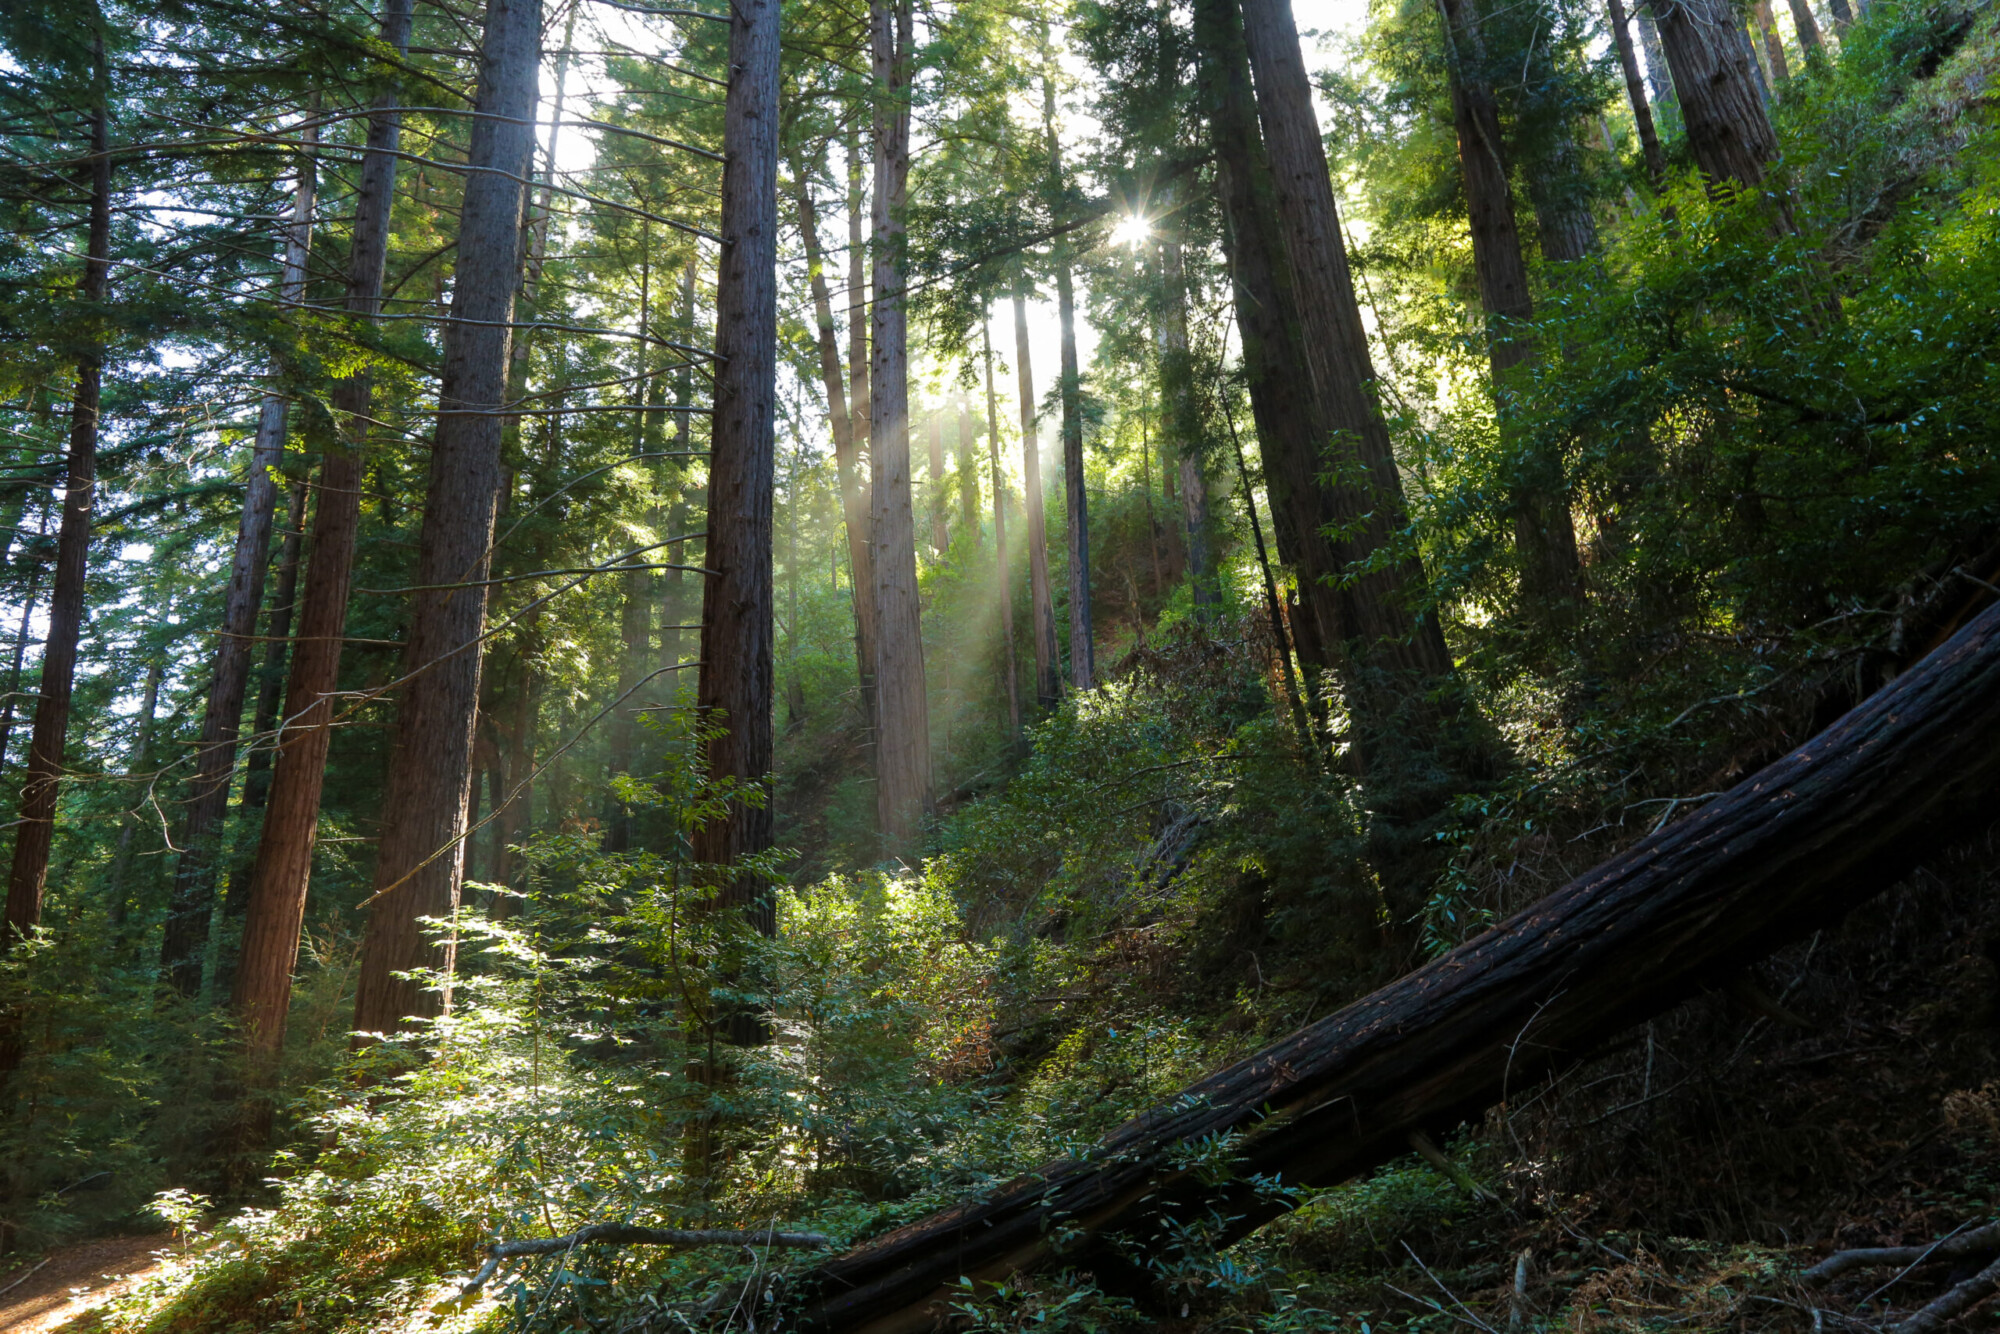 Sun filtering through the trees on a hiking trail in Big Sur, California.